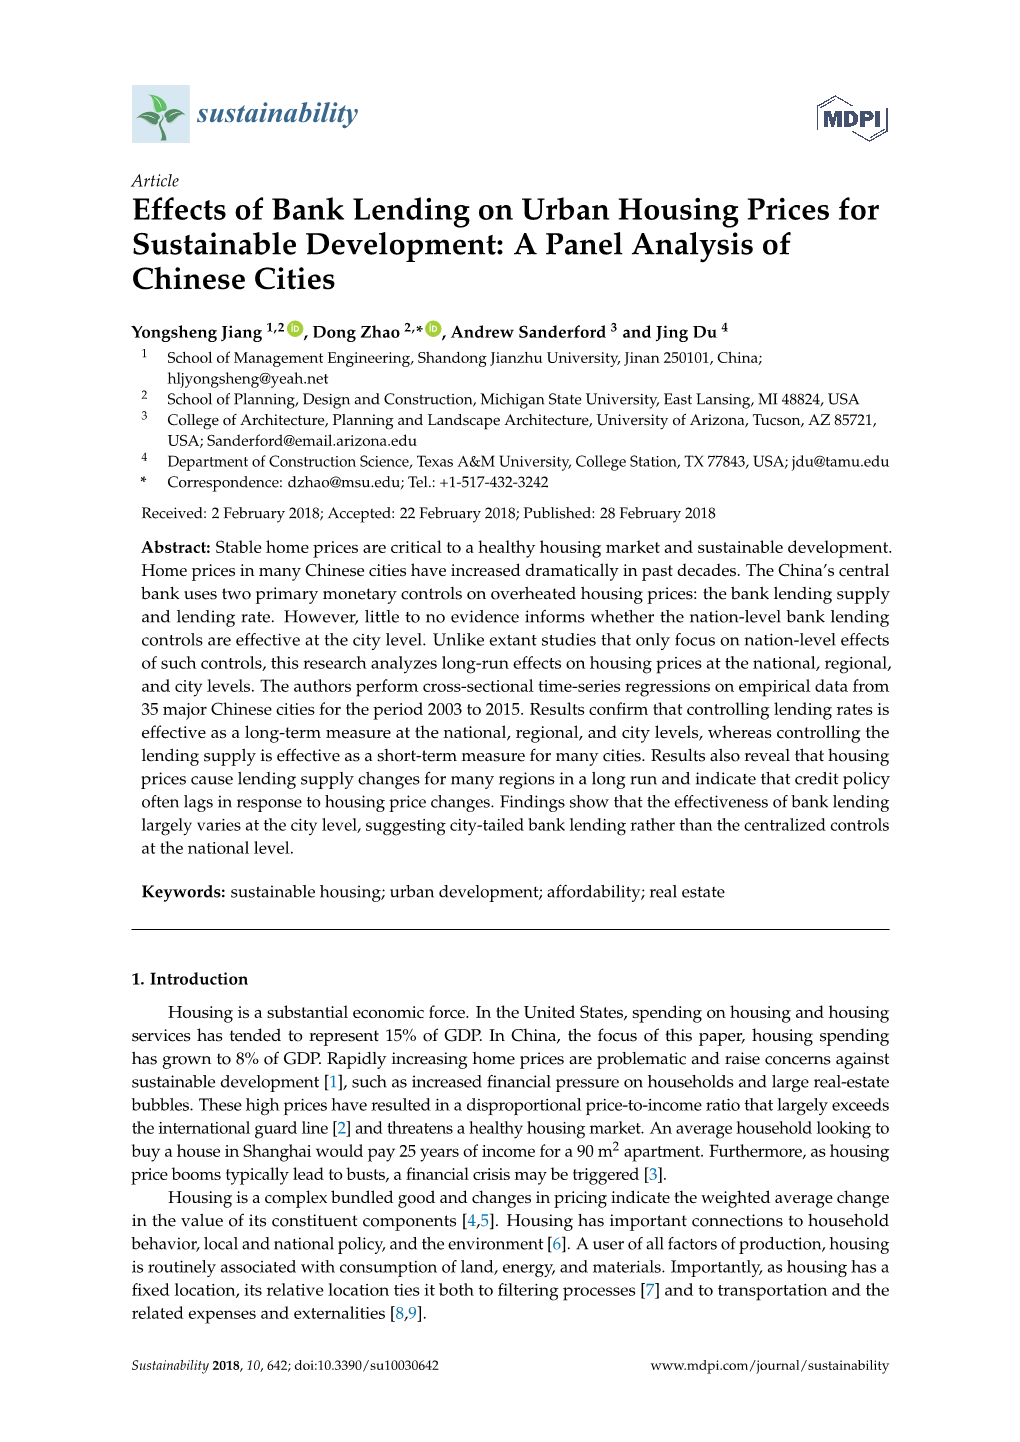 Effects of Bank Lending on Urban Housing Prices for Sustainable Development: a Panel Analysis of Chinese Cities